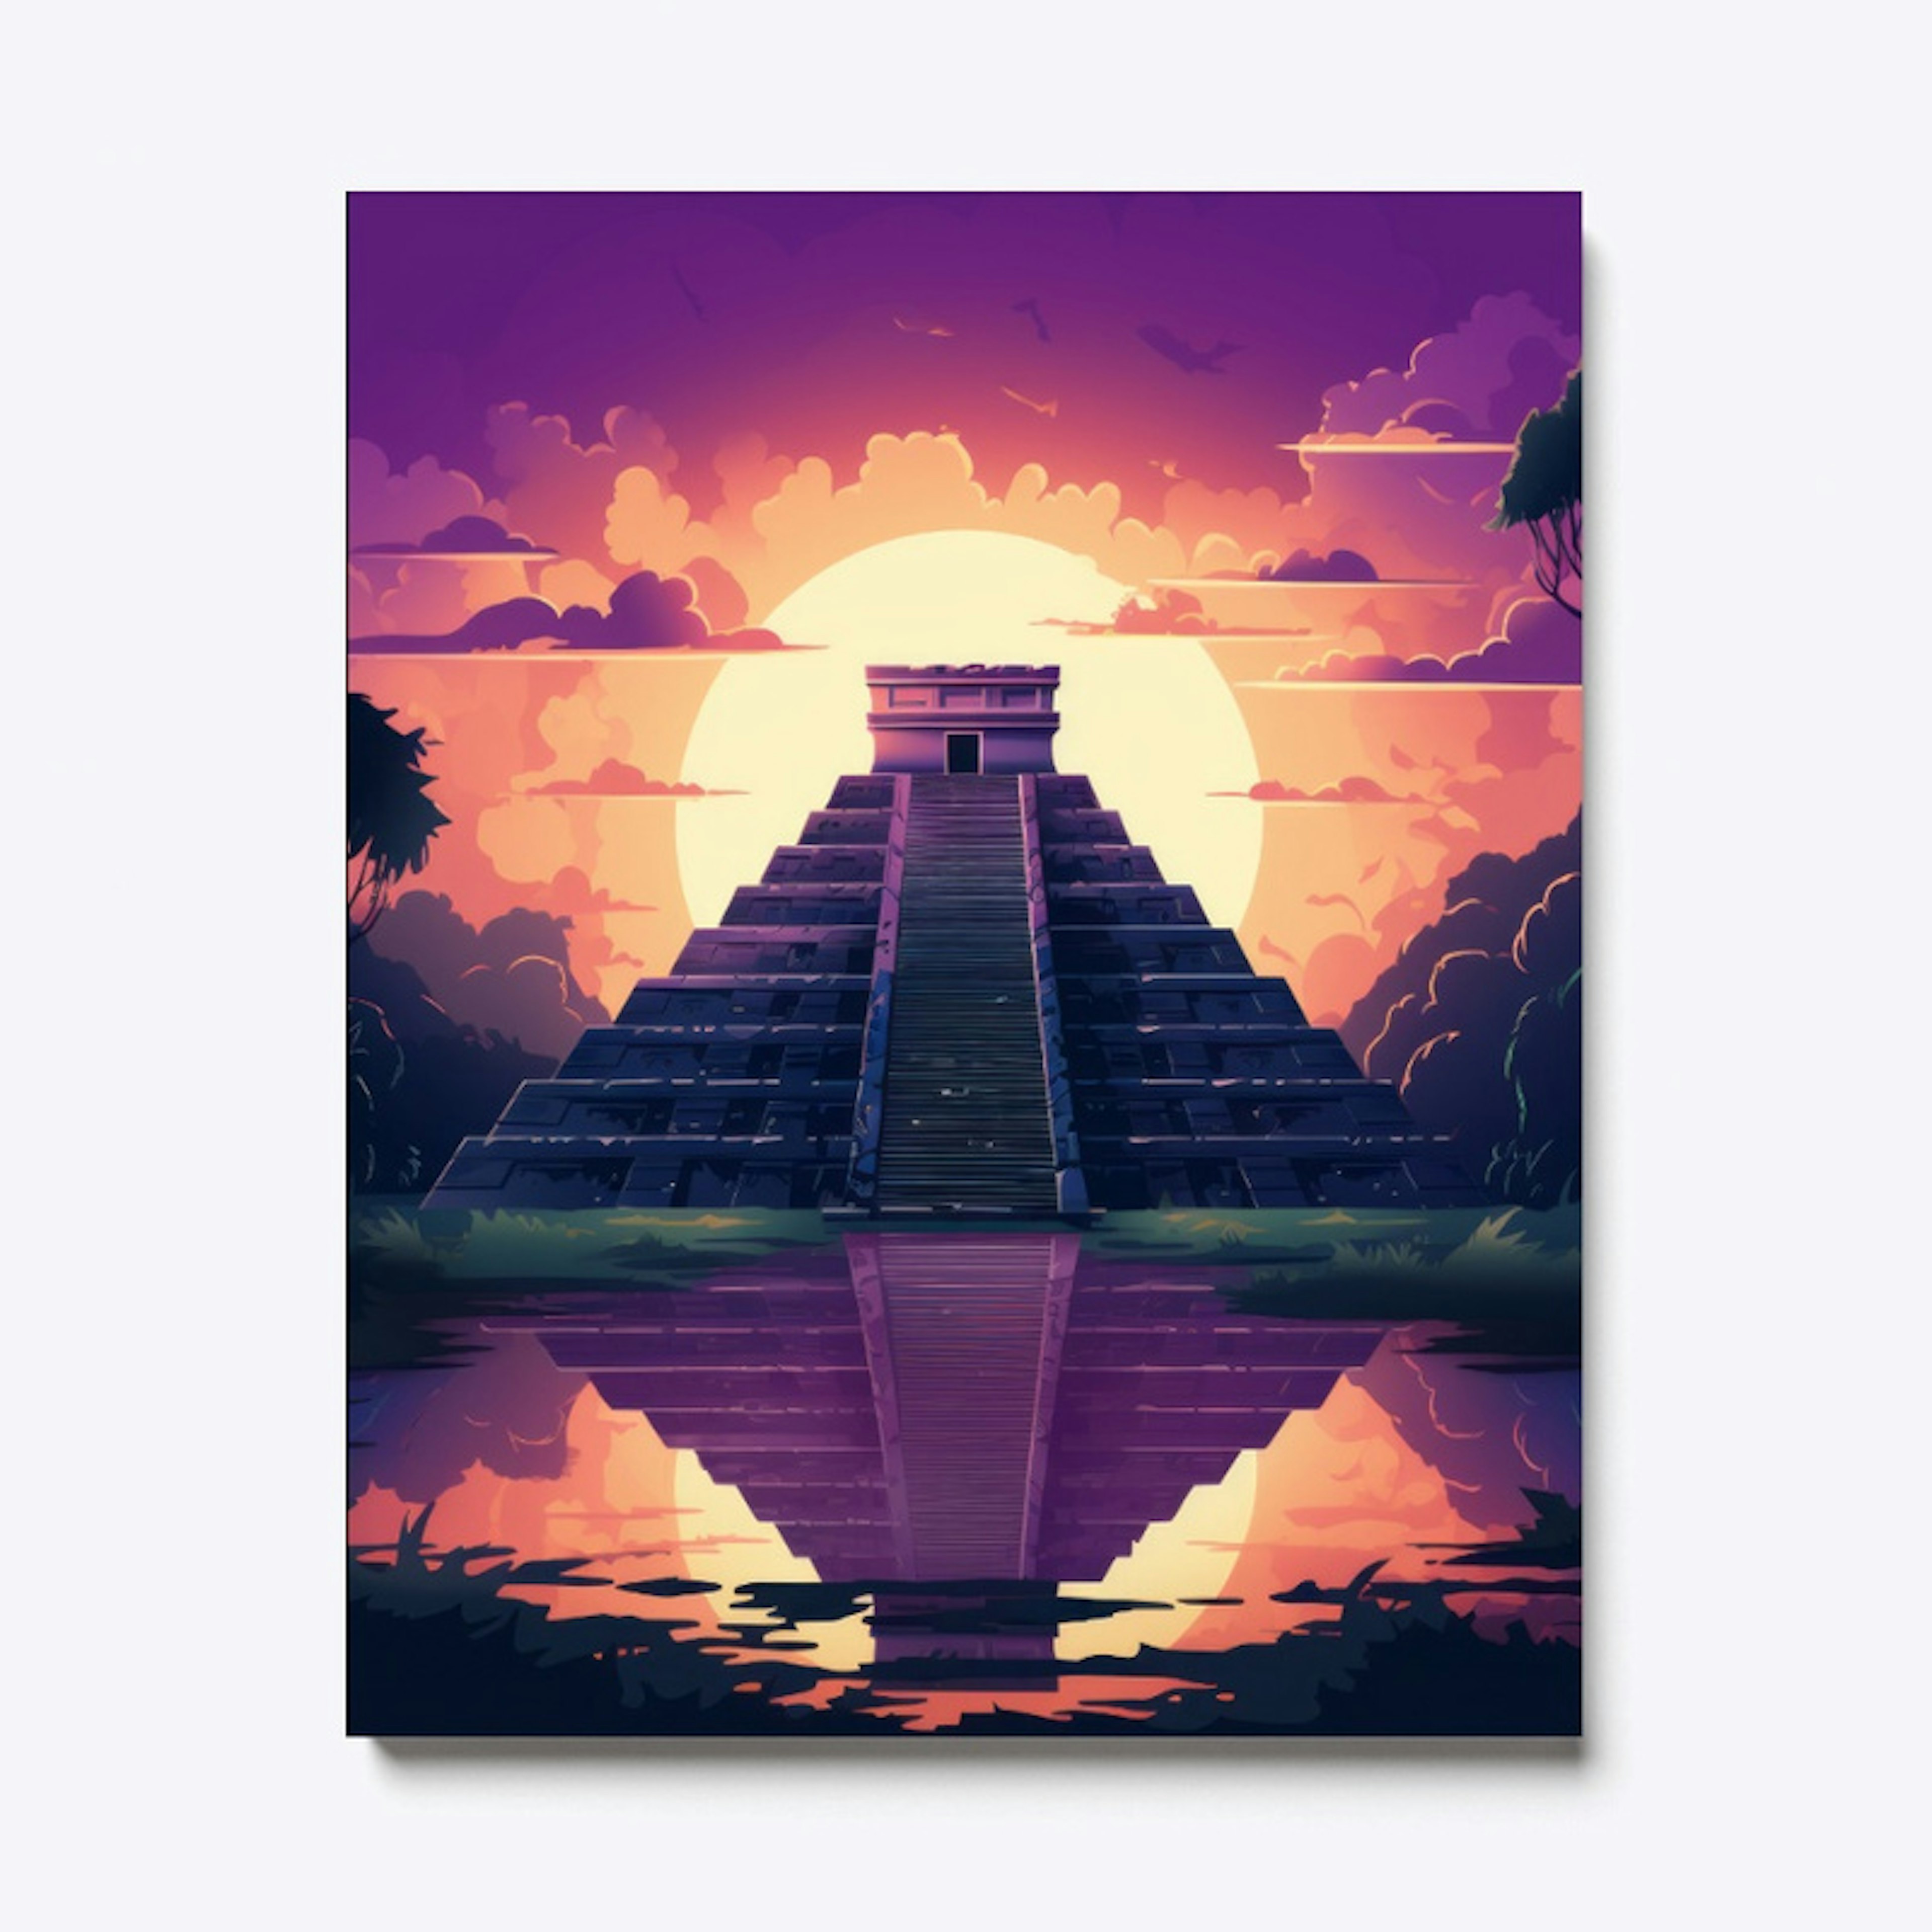 Chichen Itza: Echoes of the Ancient Maya